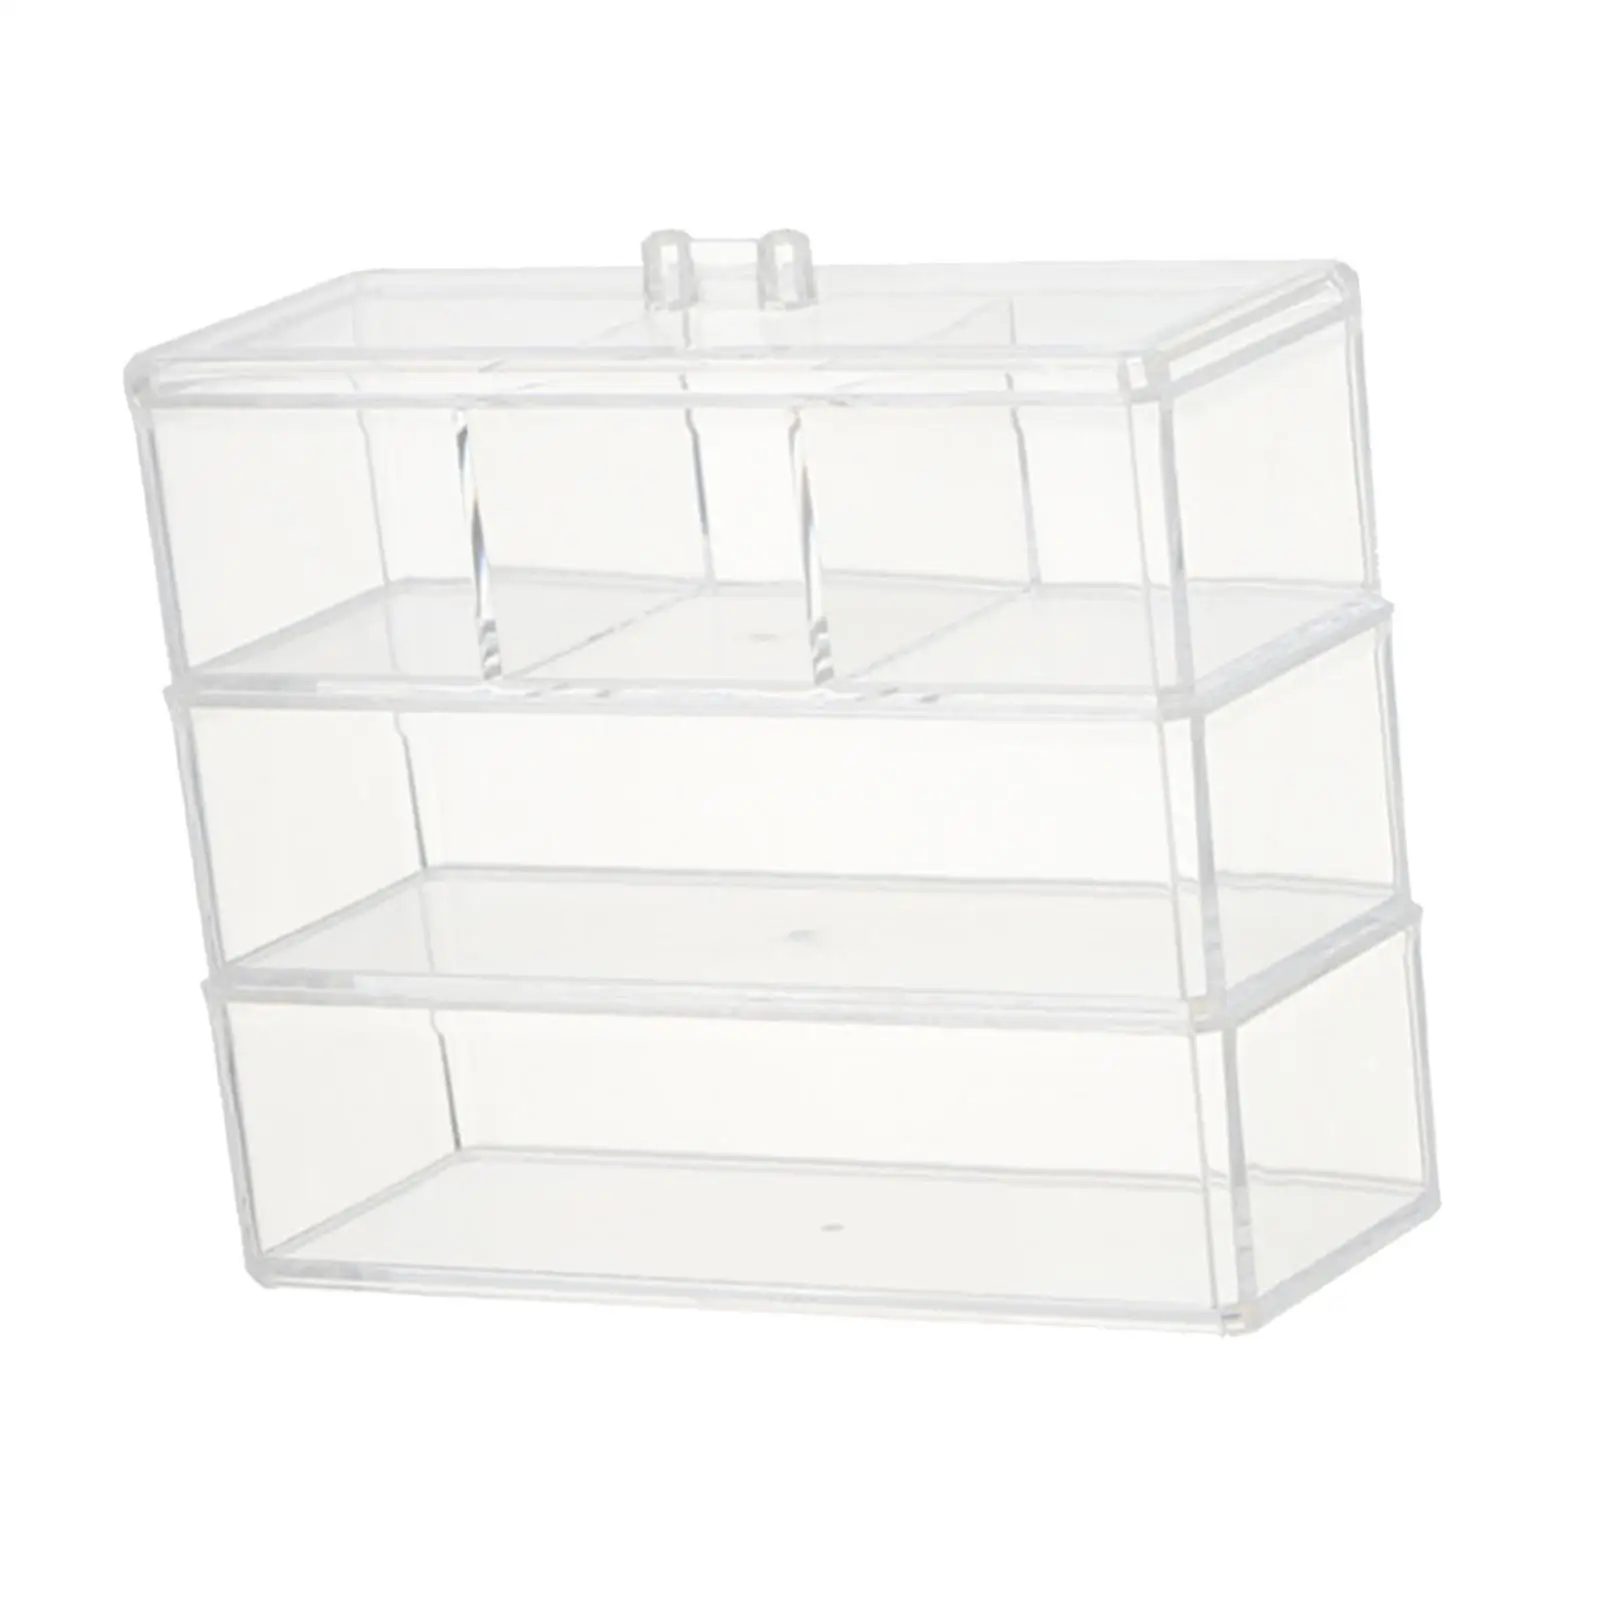 Desk Organizer Storage Box Office Stackable Acrylic Jewelry Cabinet Portable